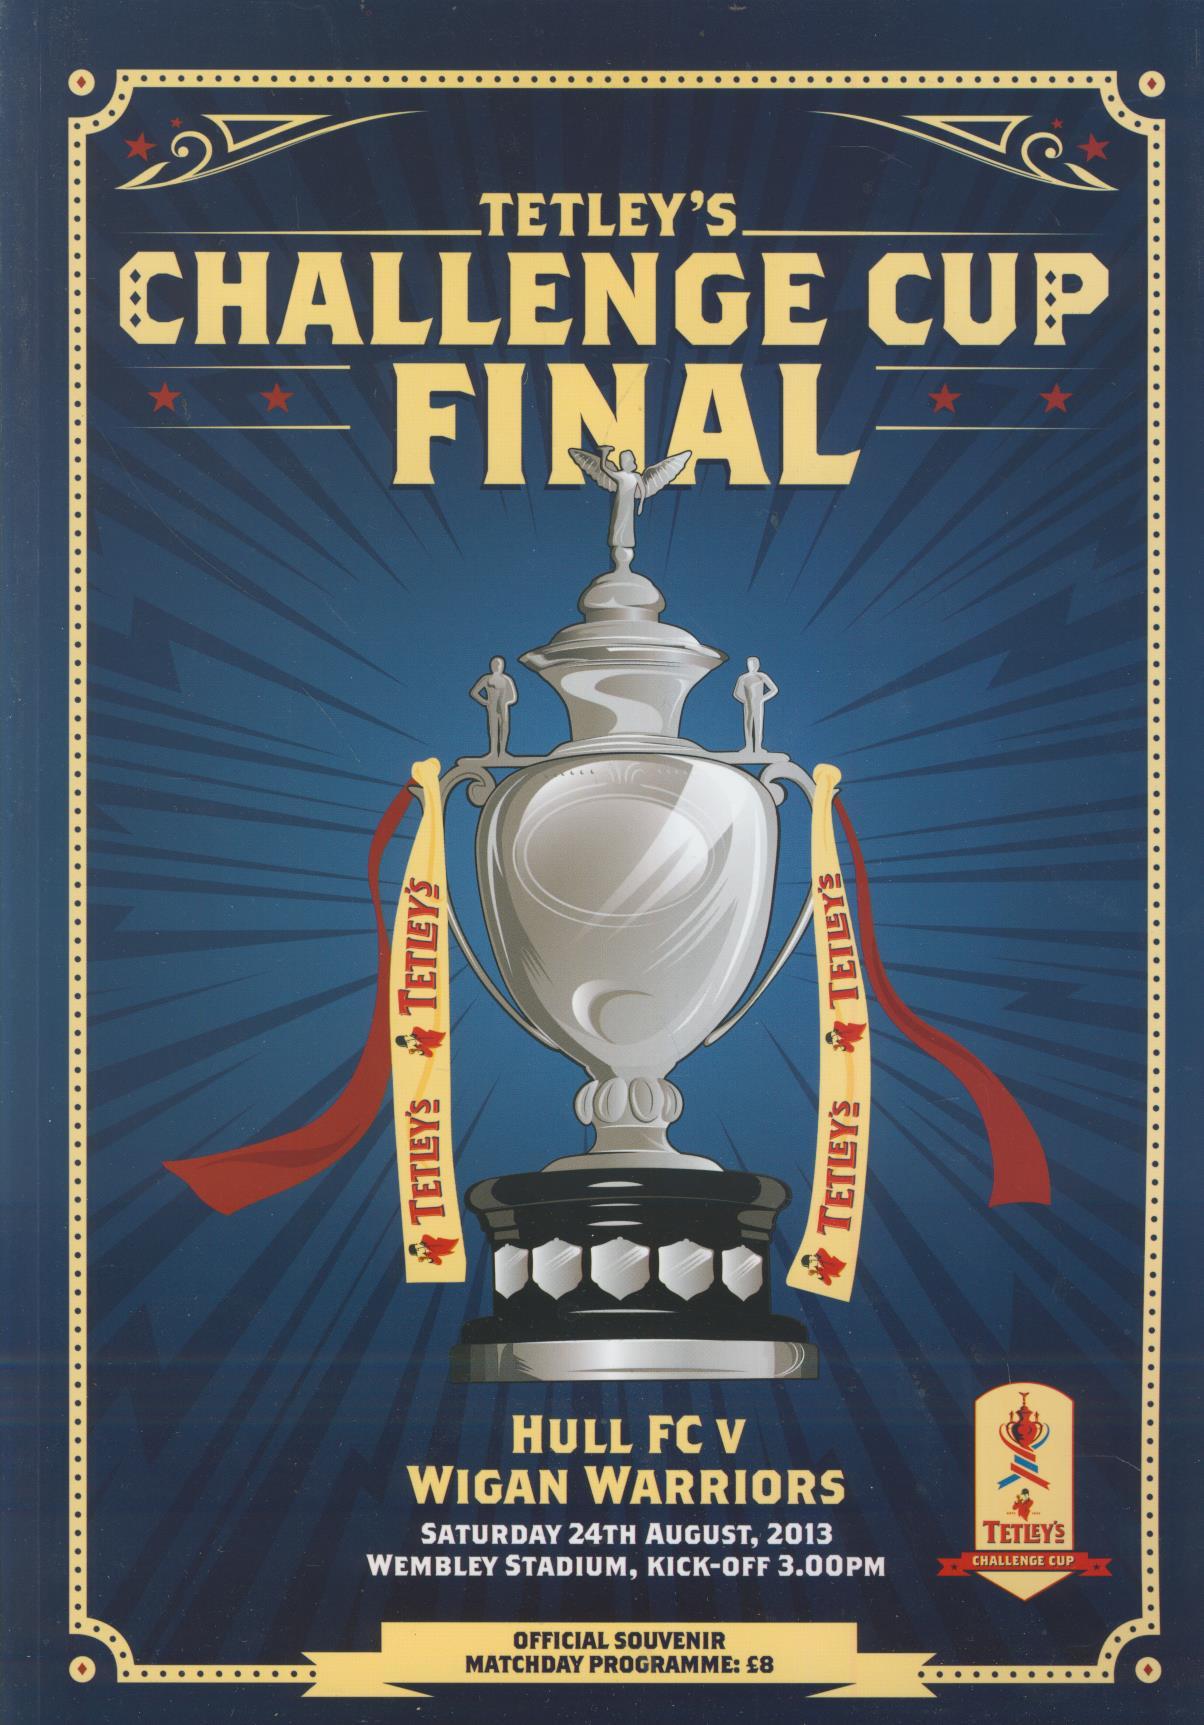 Hull Fc V Wigan Warriors 2013 Challenge Cup Final Rugby League Programme